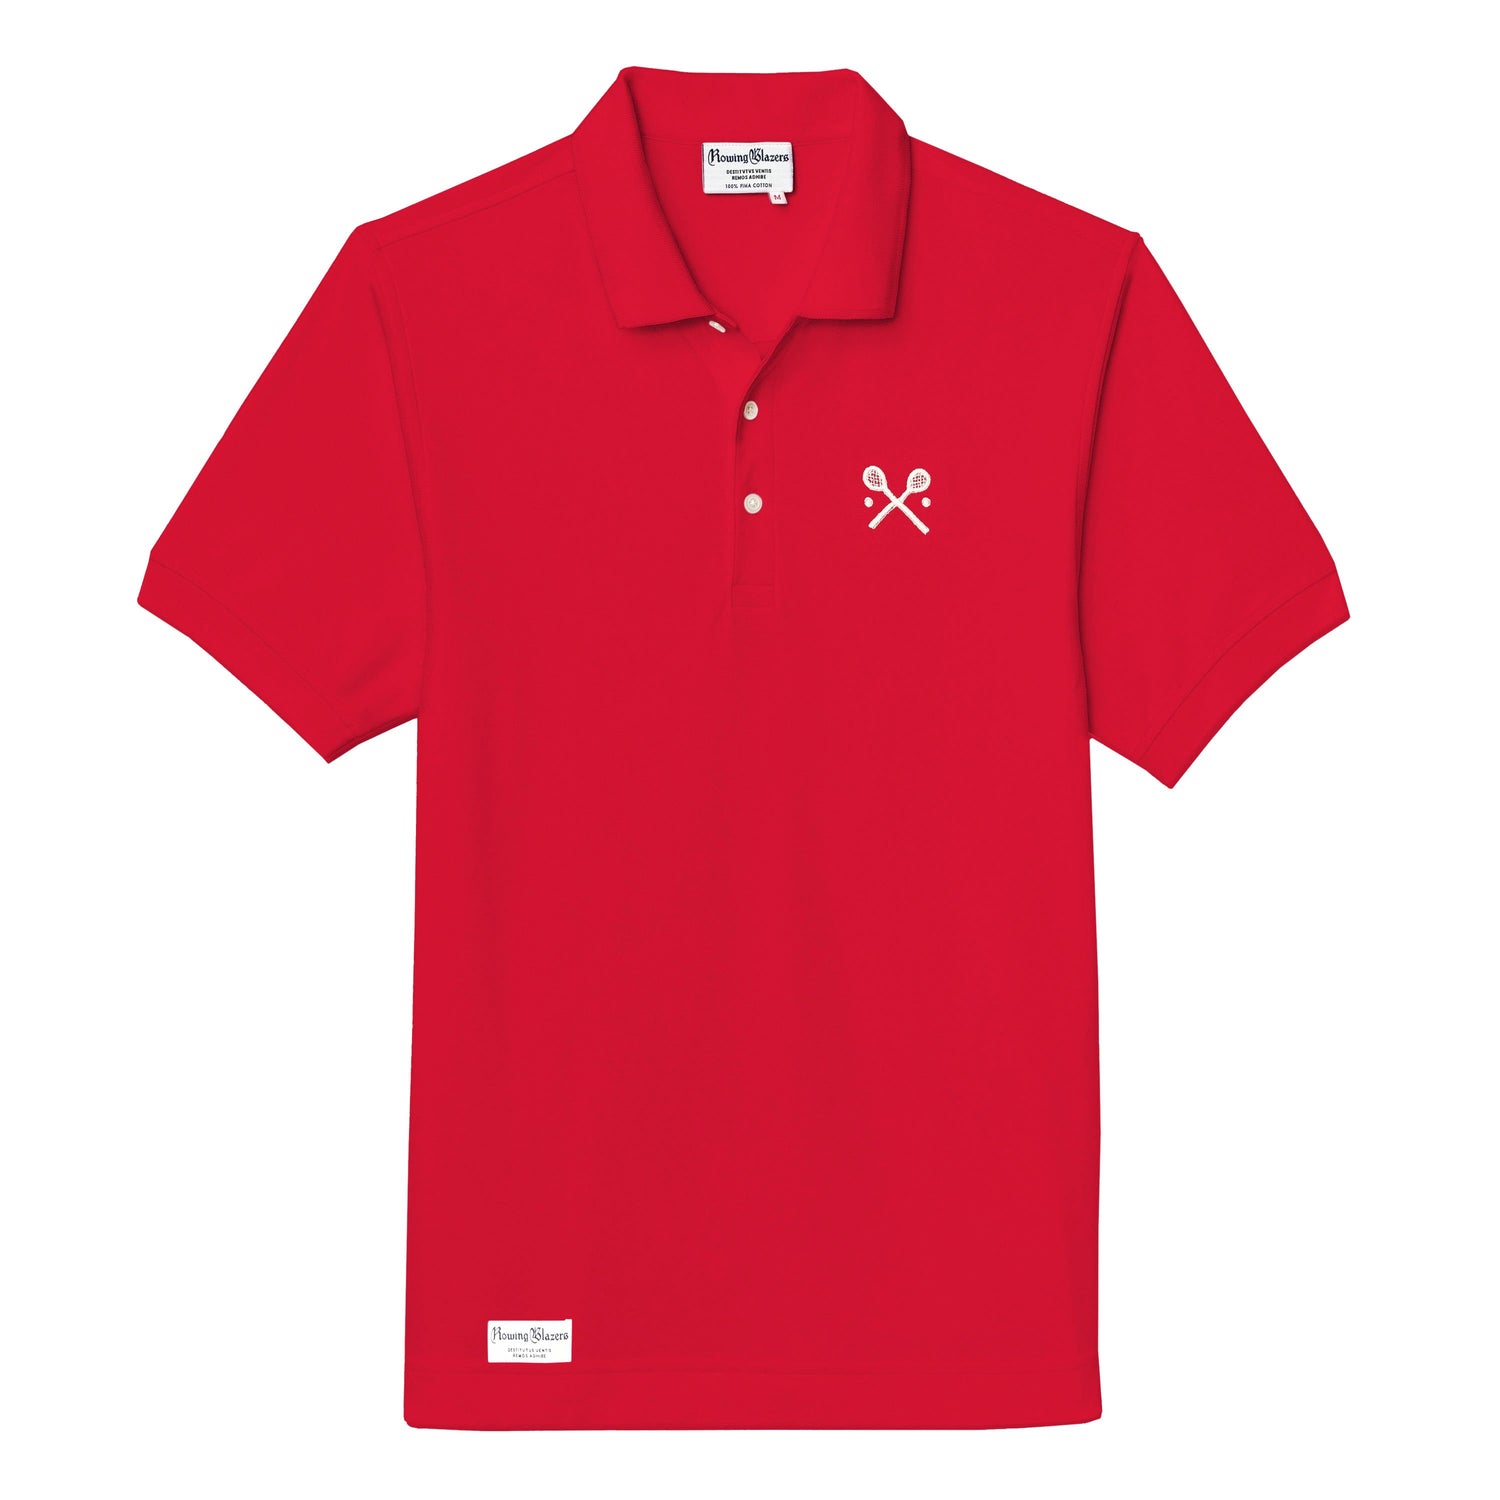 Red polo jersey with embroidered crossed racquets motif.